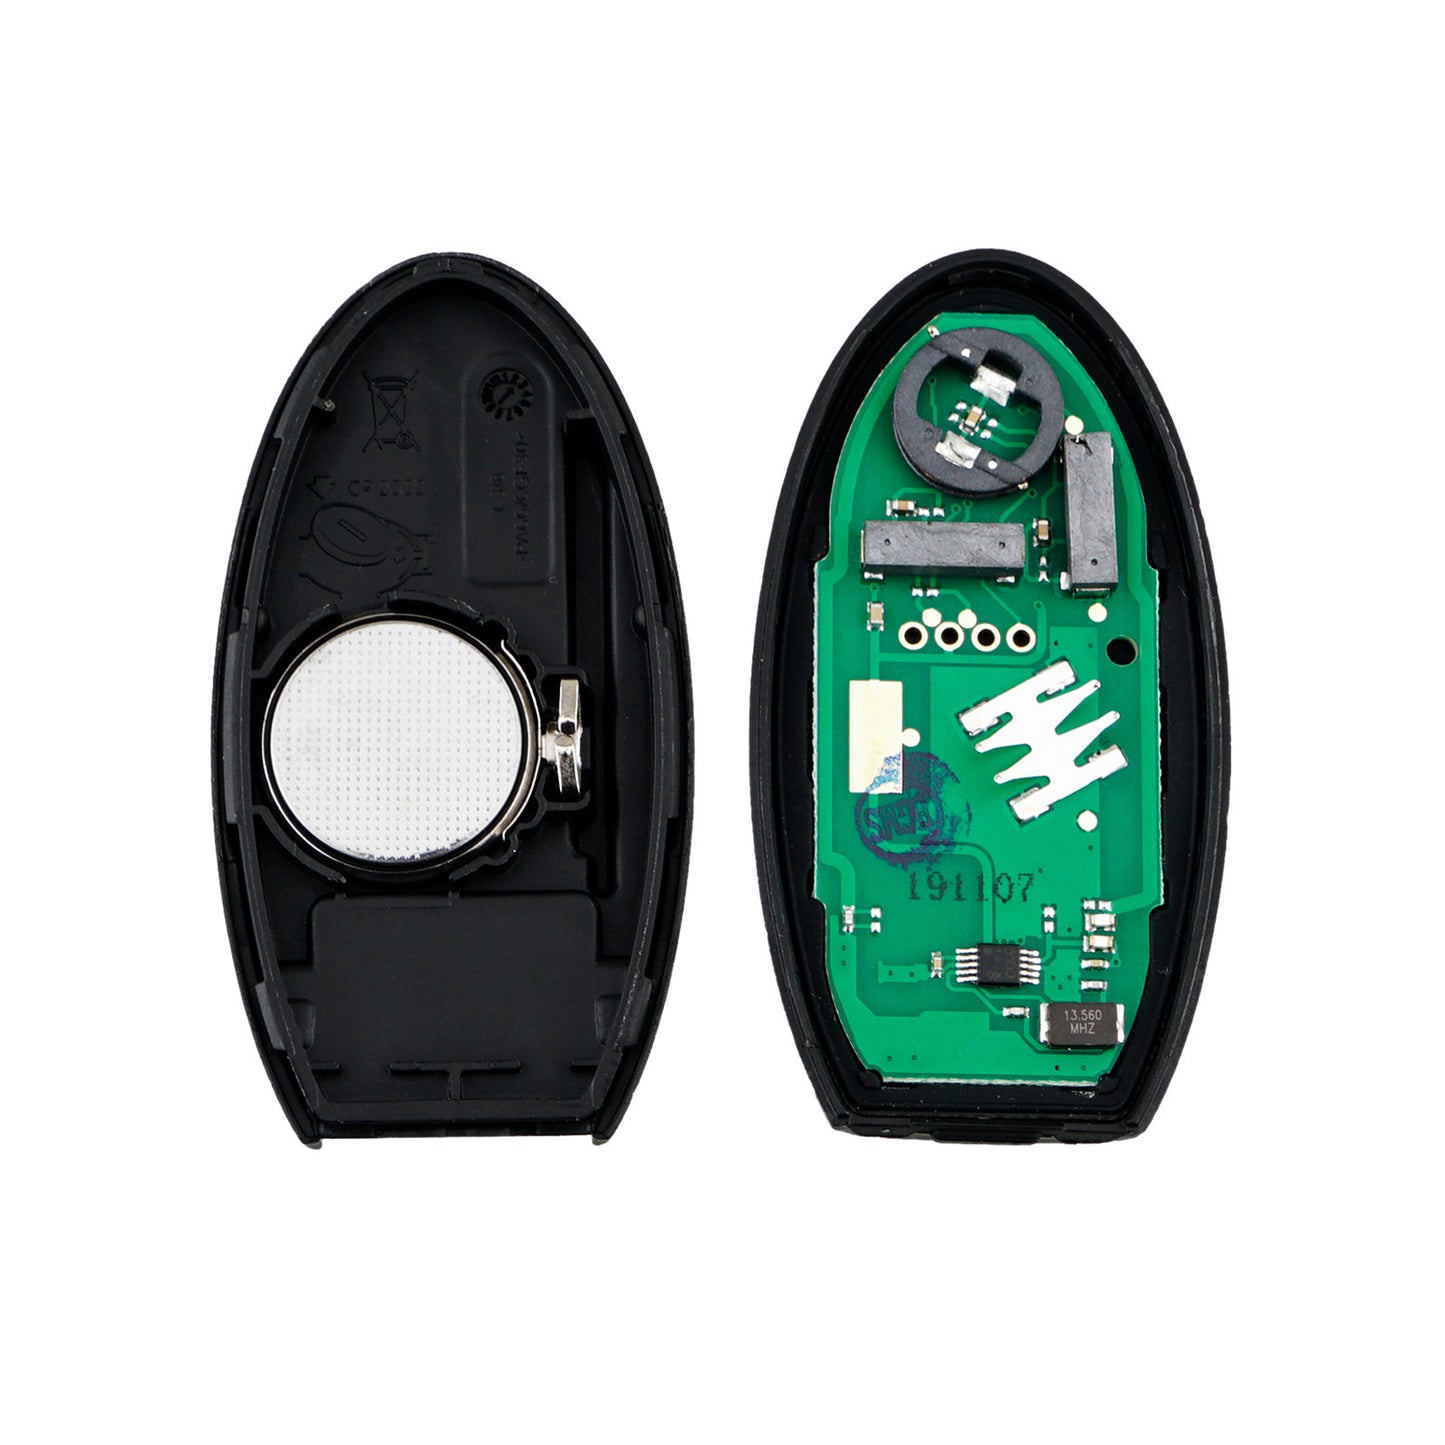 4 Butttons 433MHz 4A Chip KR5S180144106 Smart Car Keyless Remote Key For 2014-2016 Nissan Rogue Auto Parts SKU : J303